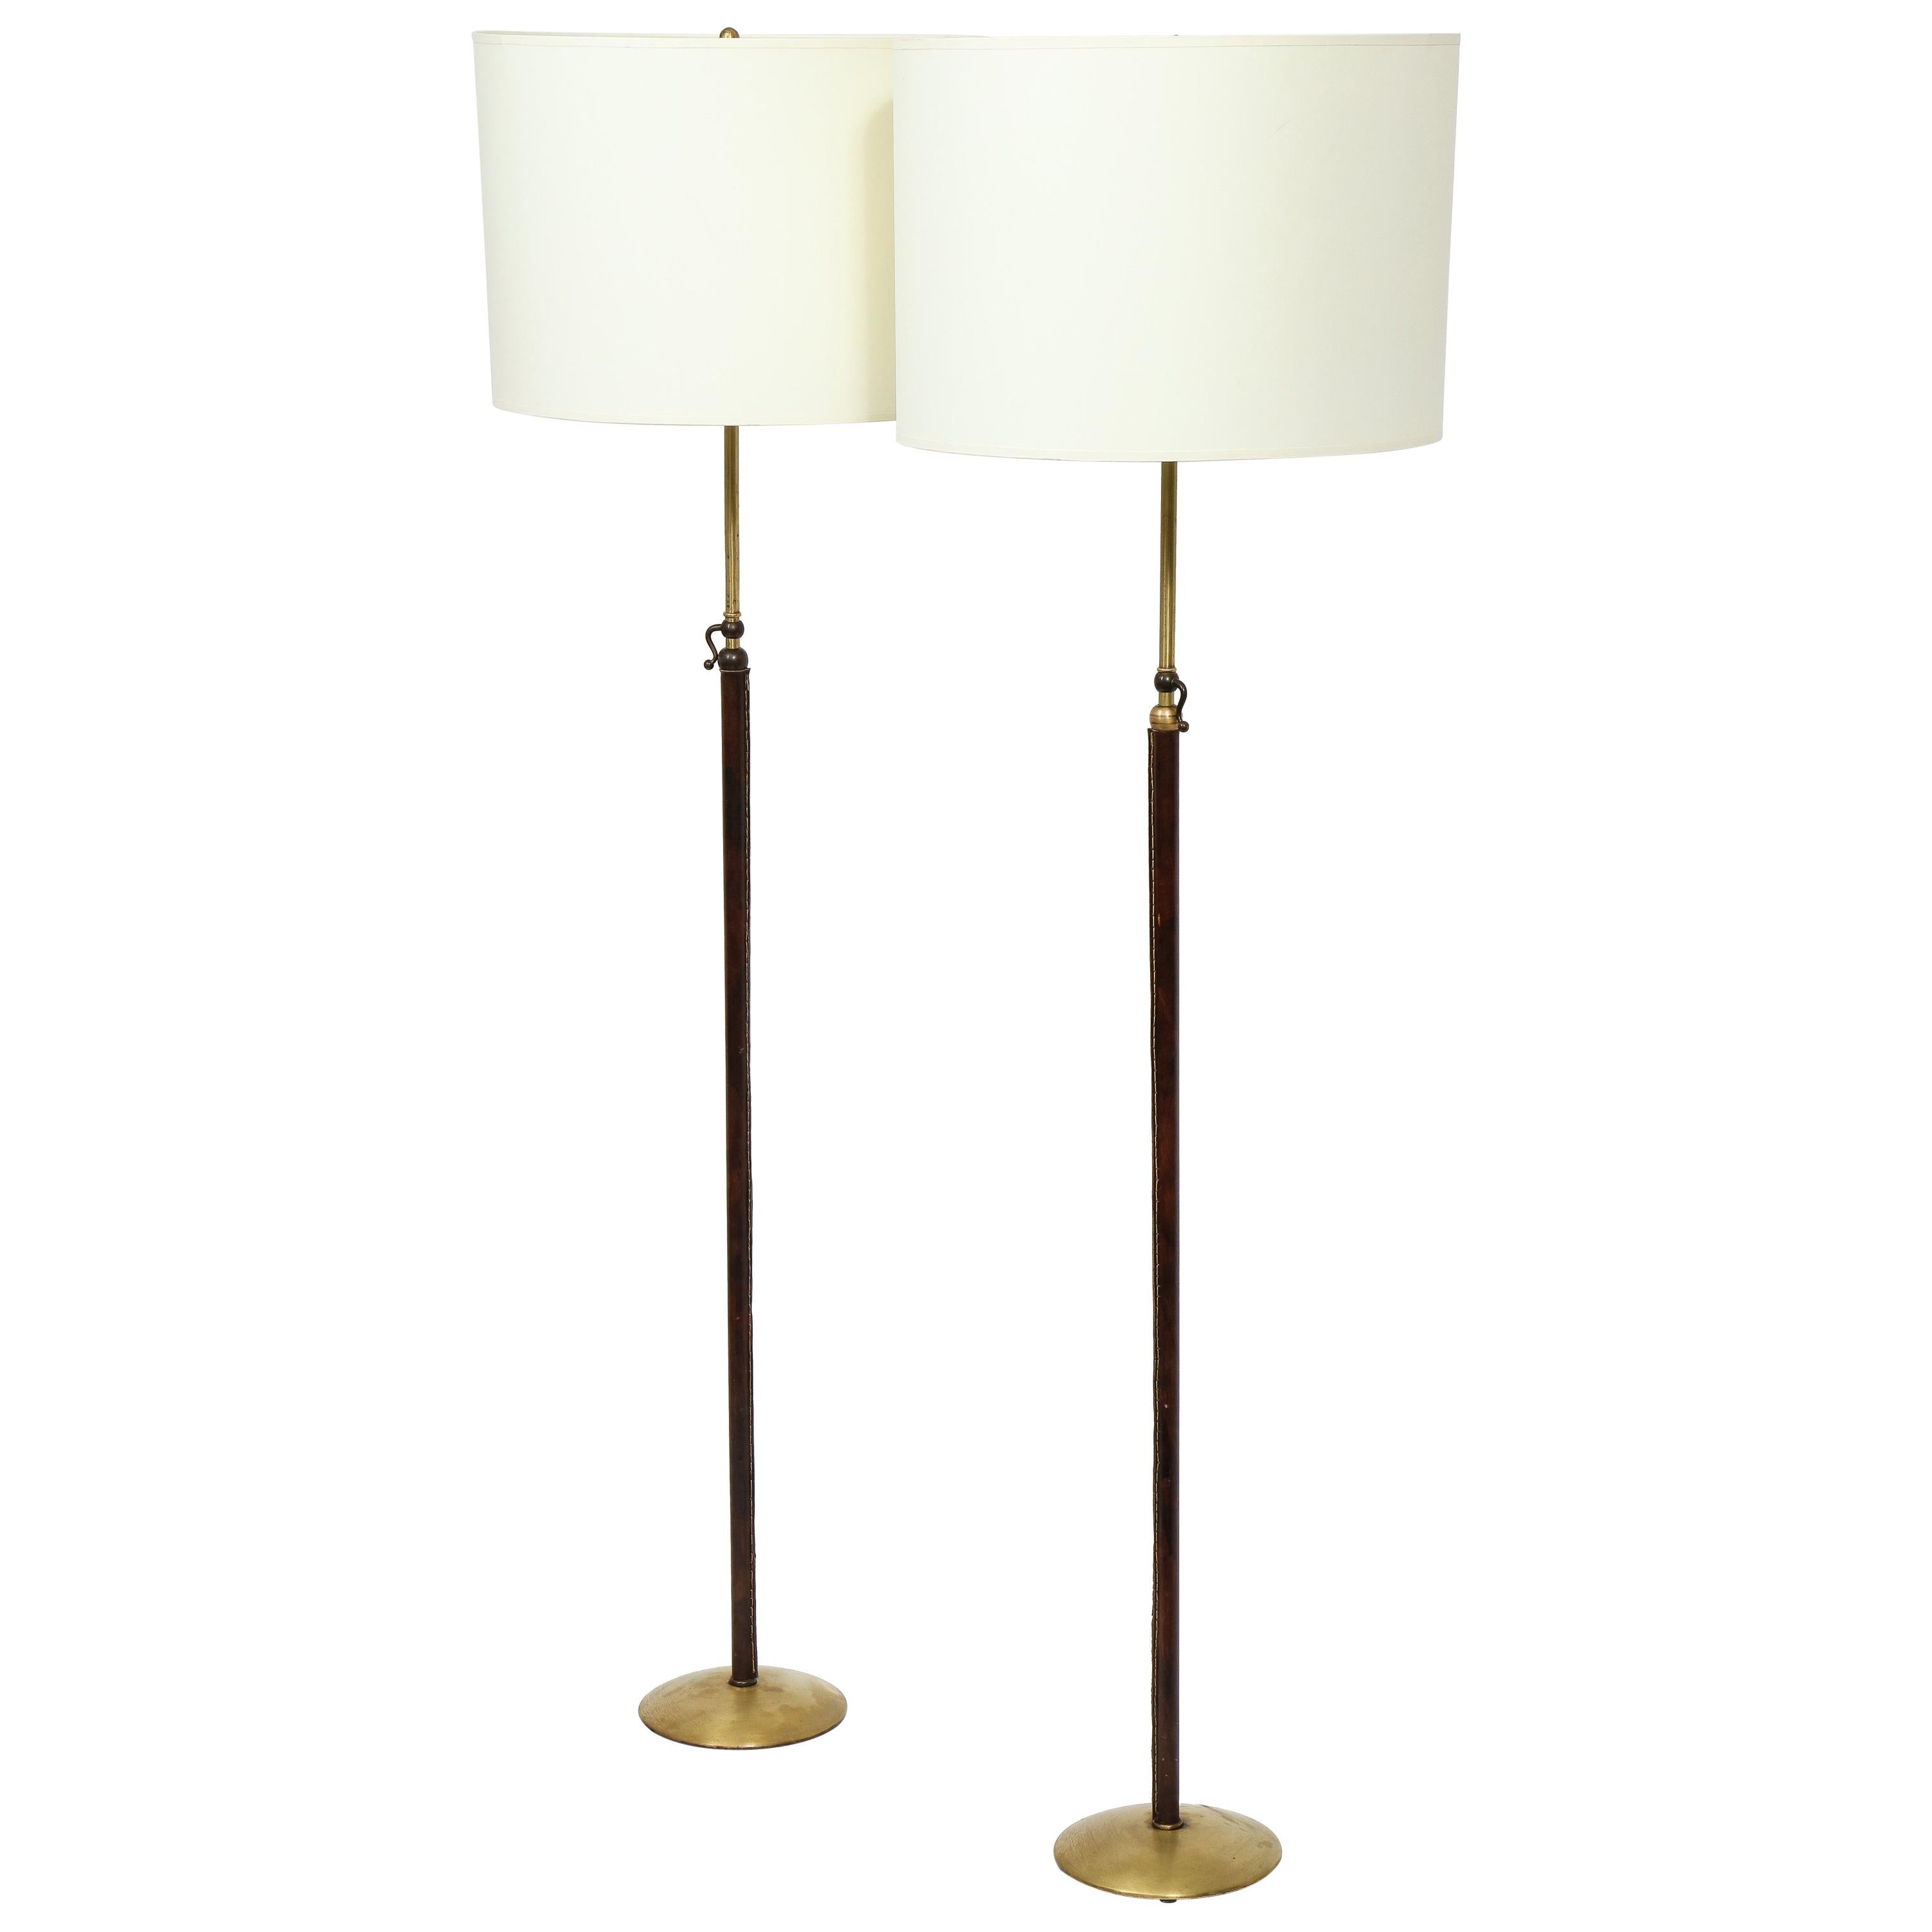 Pair of Leather and Brass Adjustable Floor Lamps by Jacques Adnet, France, 1950s For Sale